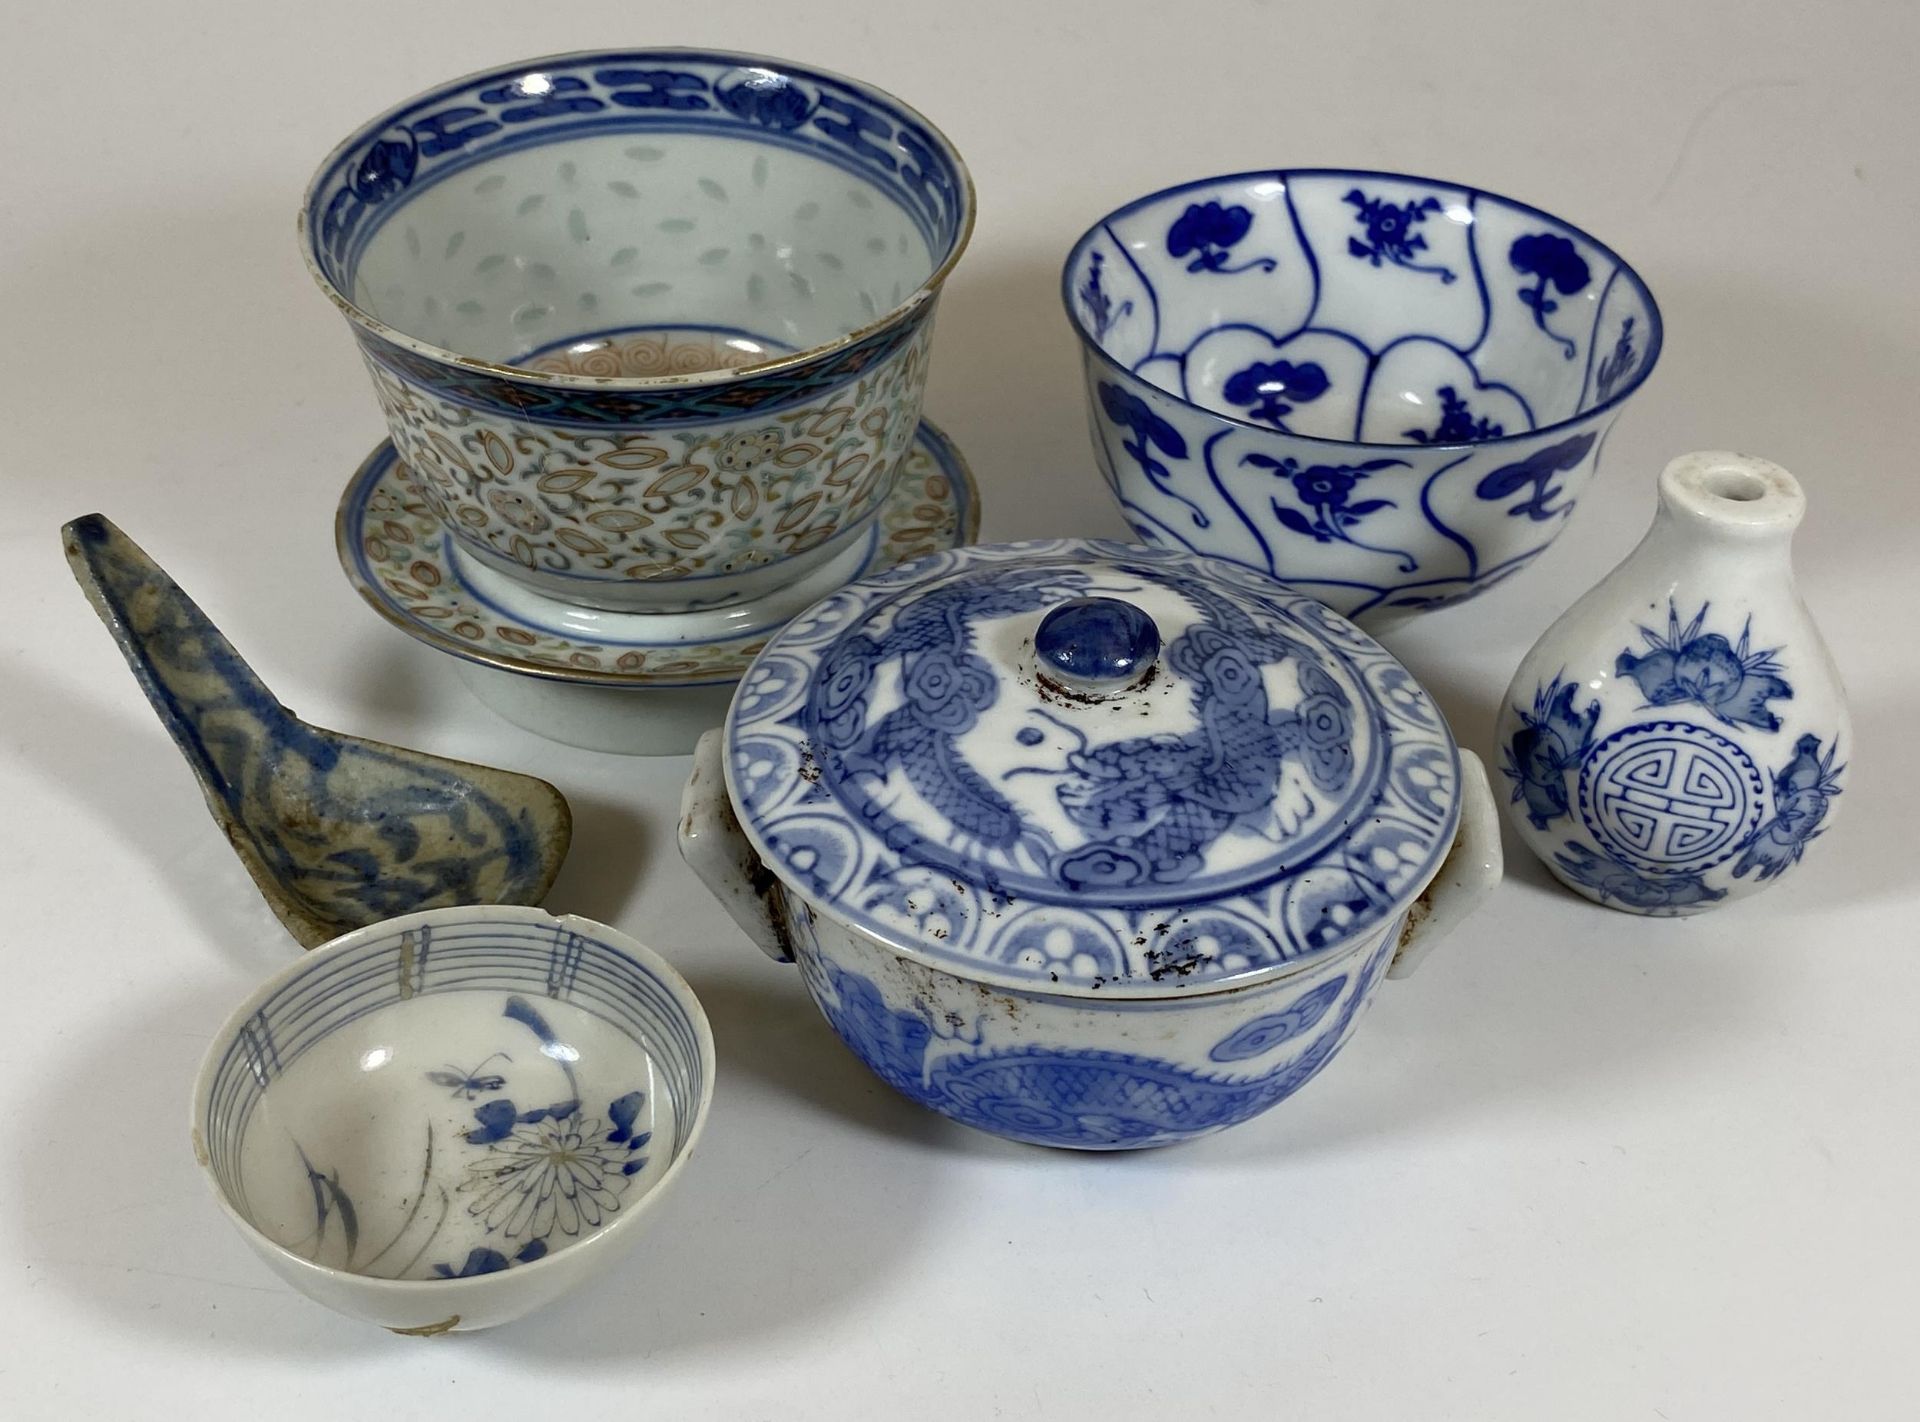 A COLLECTION OF CHINESE BLUE AND WHITE PORCELAIN ITEMS, MING STYLE SPOON, RICE BOWL, LIDDED DRAGON